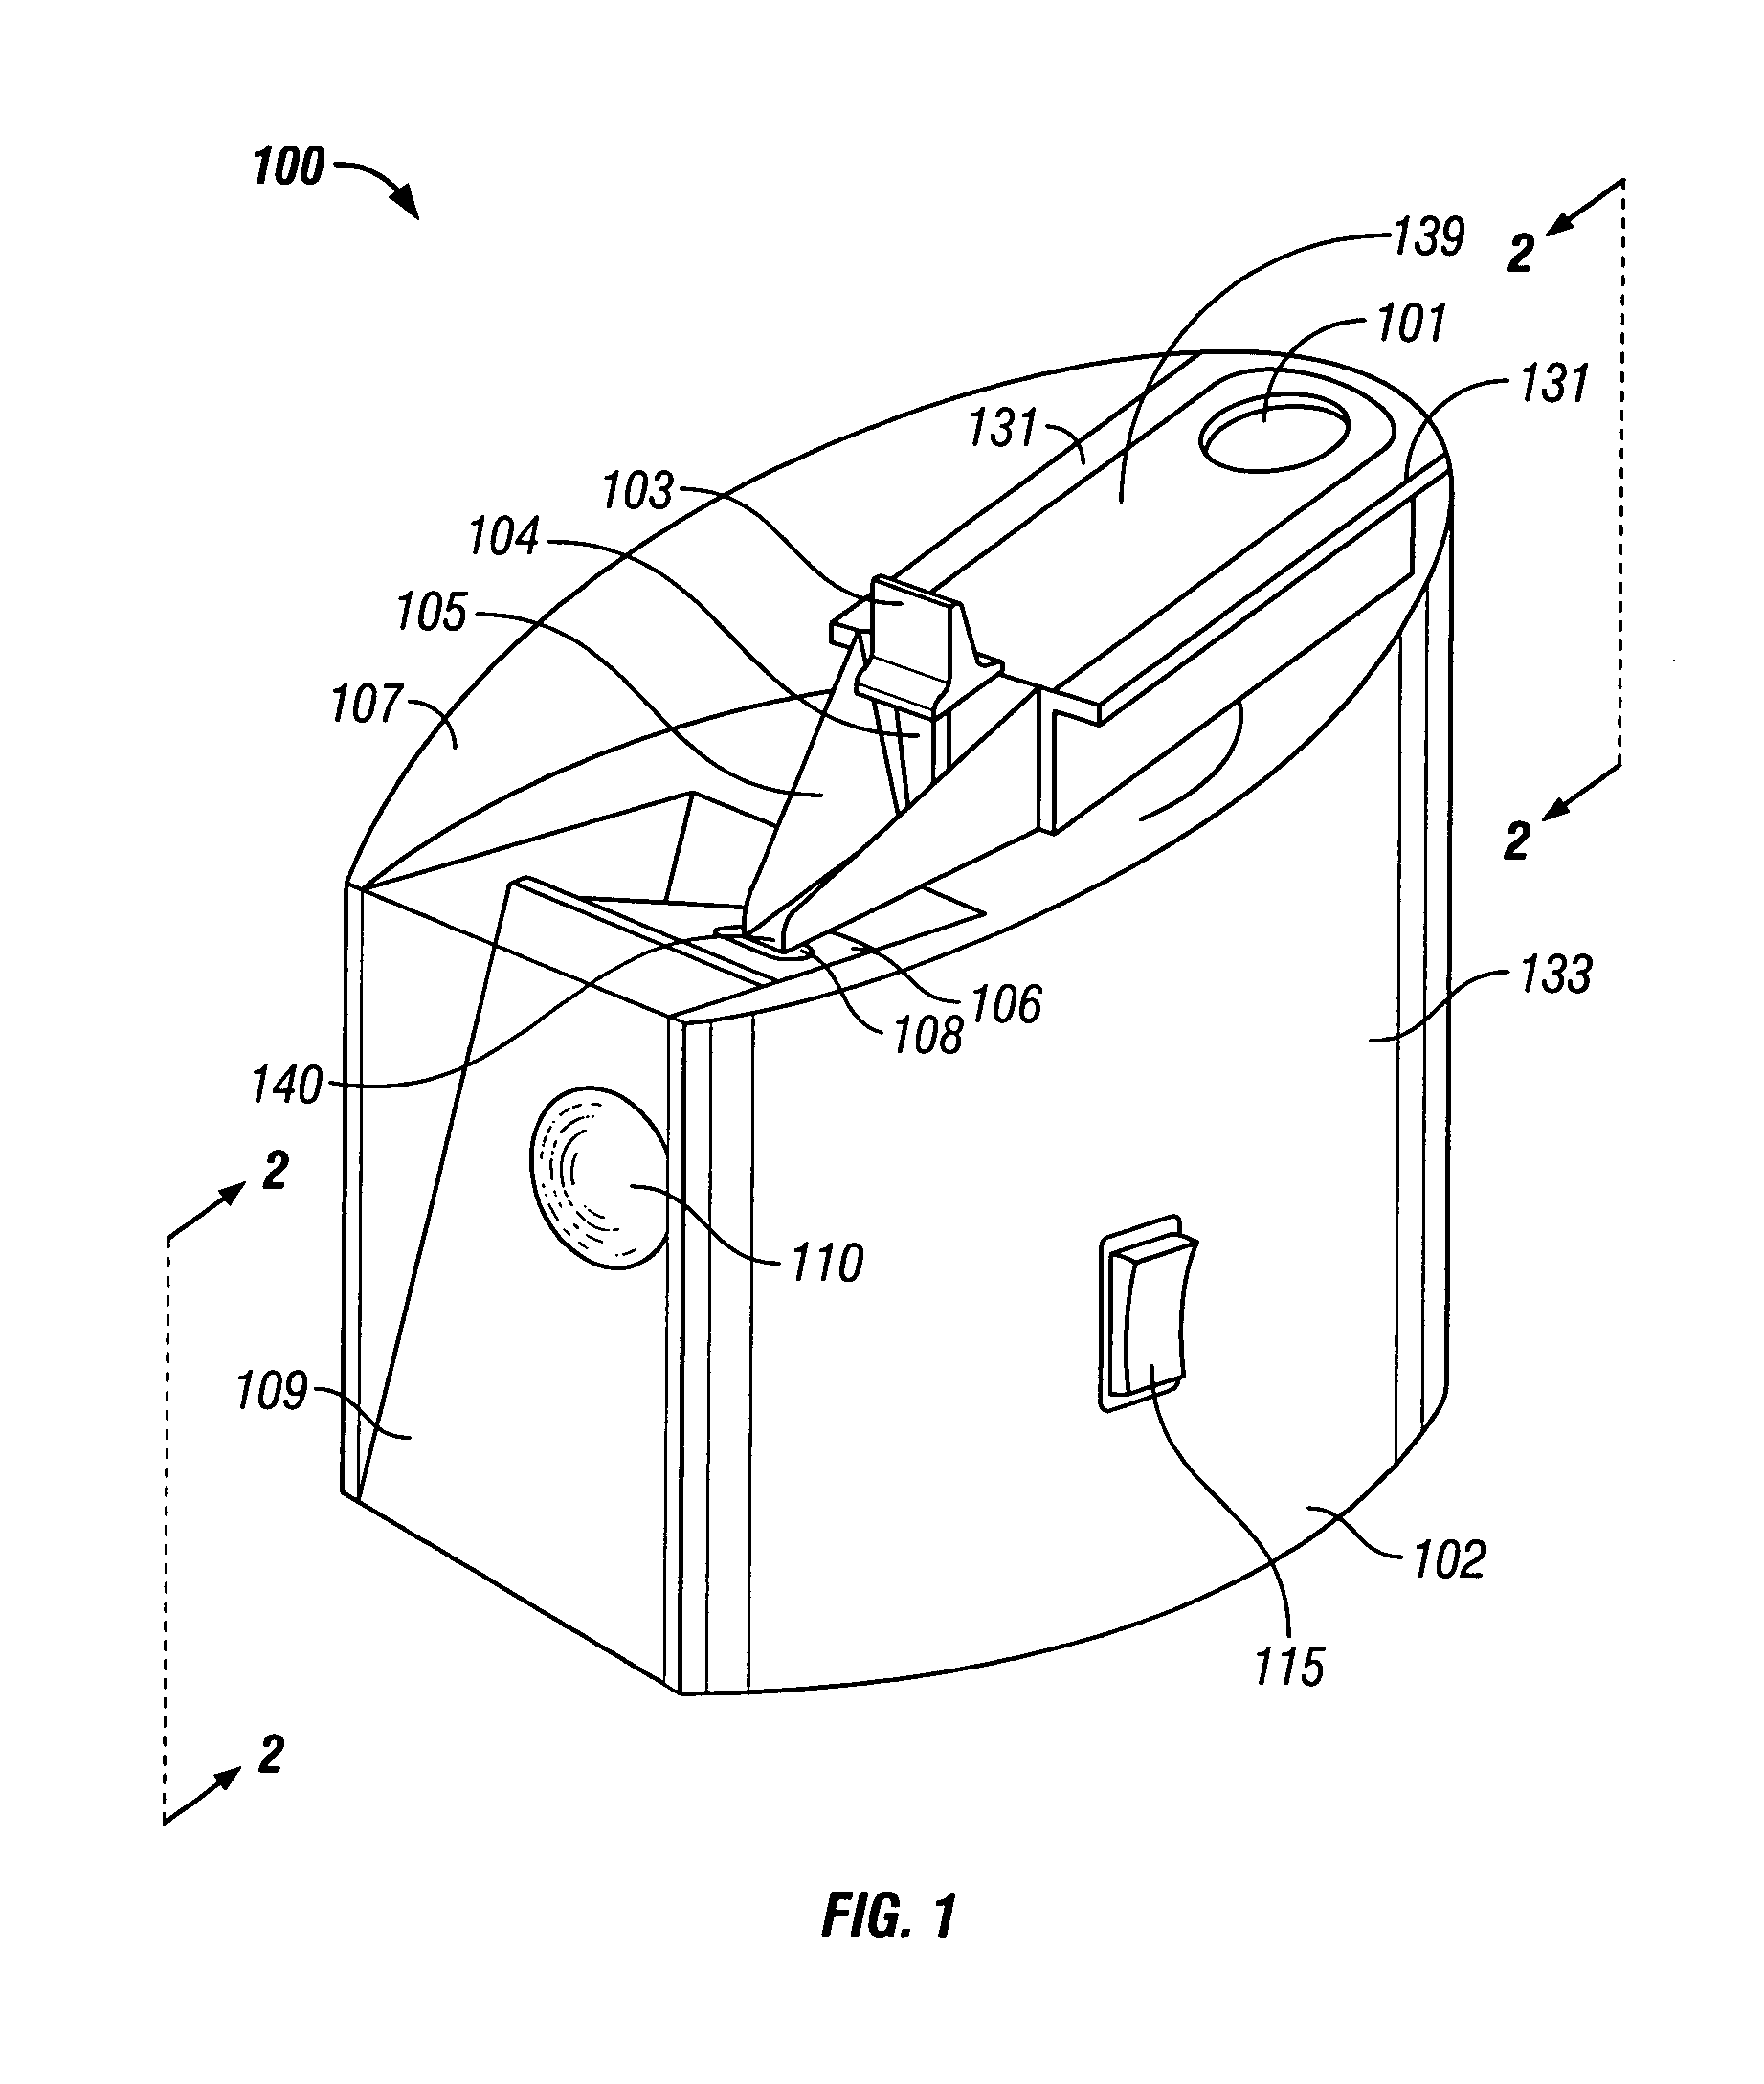 Device for melting and remolding crayons